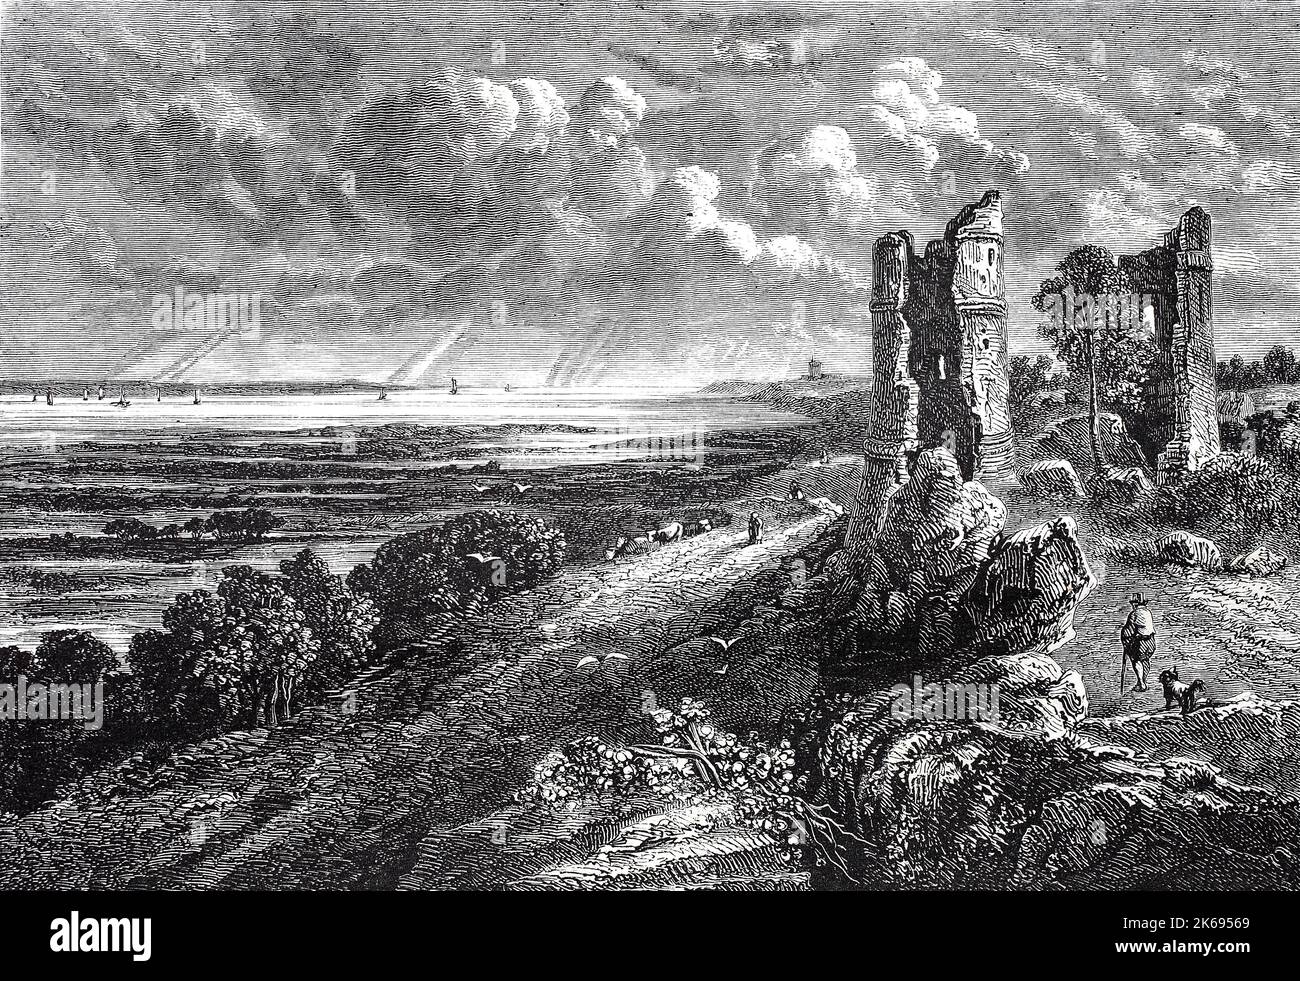 Digital improved reproduction, landscape by the sea with a ruined castle, hadleigh castle is a ruined castle on a hillside above the estuary of the thames south of the town of hadleigh in the english county of essex, after a painting by john constable, original woodprint from th 19th century Stock Photo